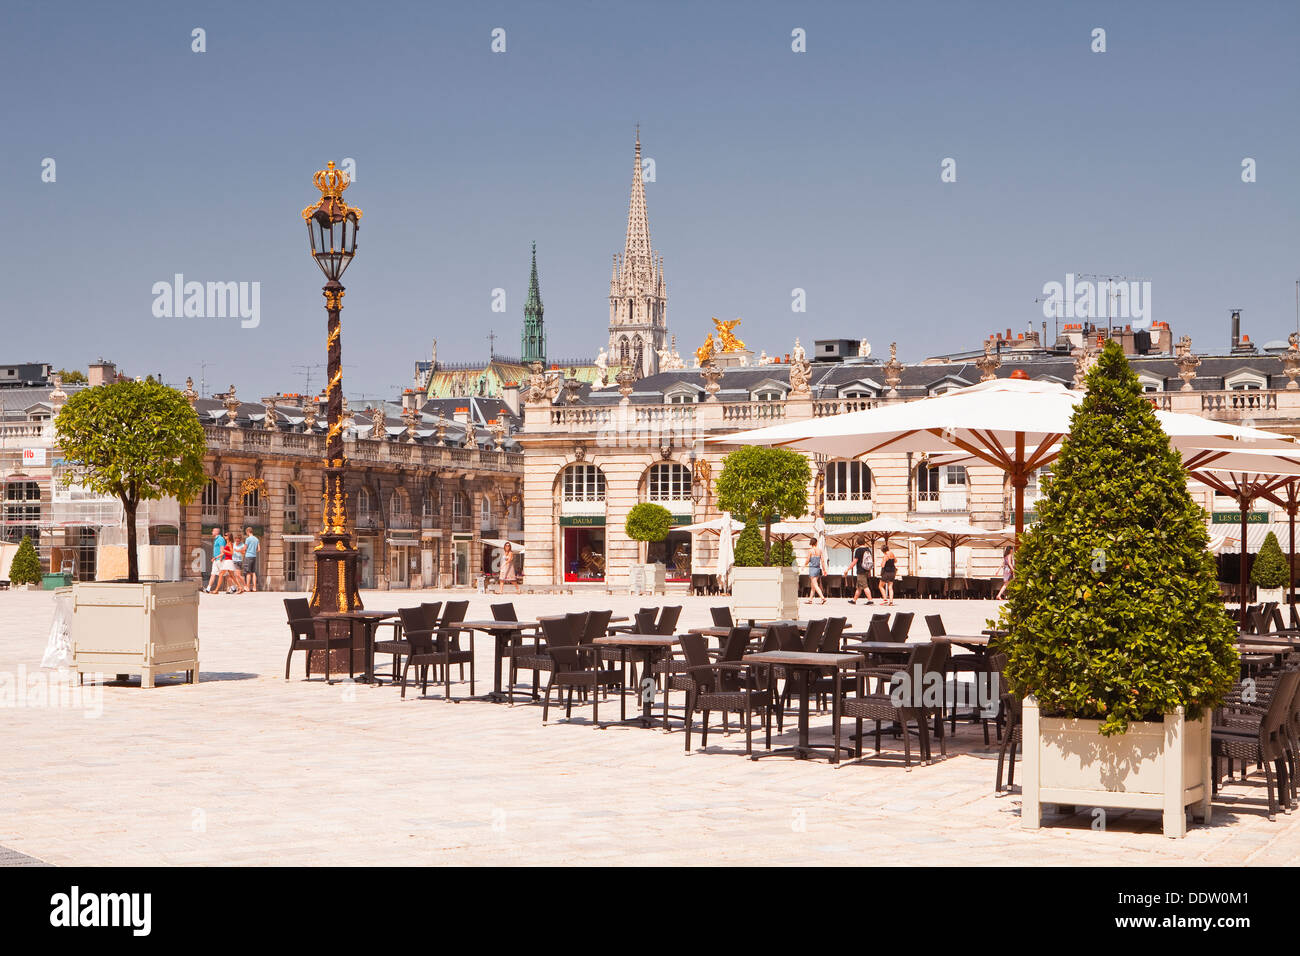 Place Stanislas in the heart of the french city of Nancy. It was designated a UNESCO World Heritage Site in 1983. Stock Photo